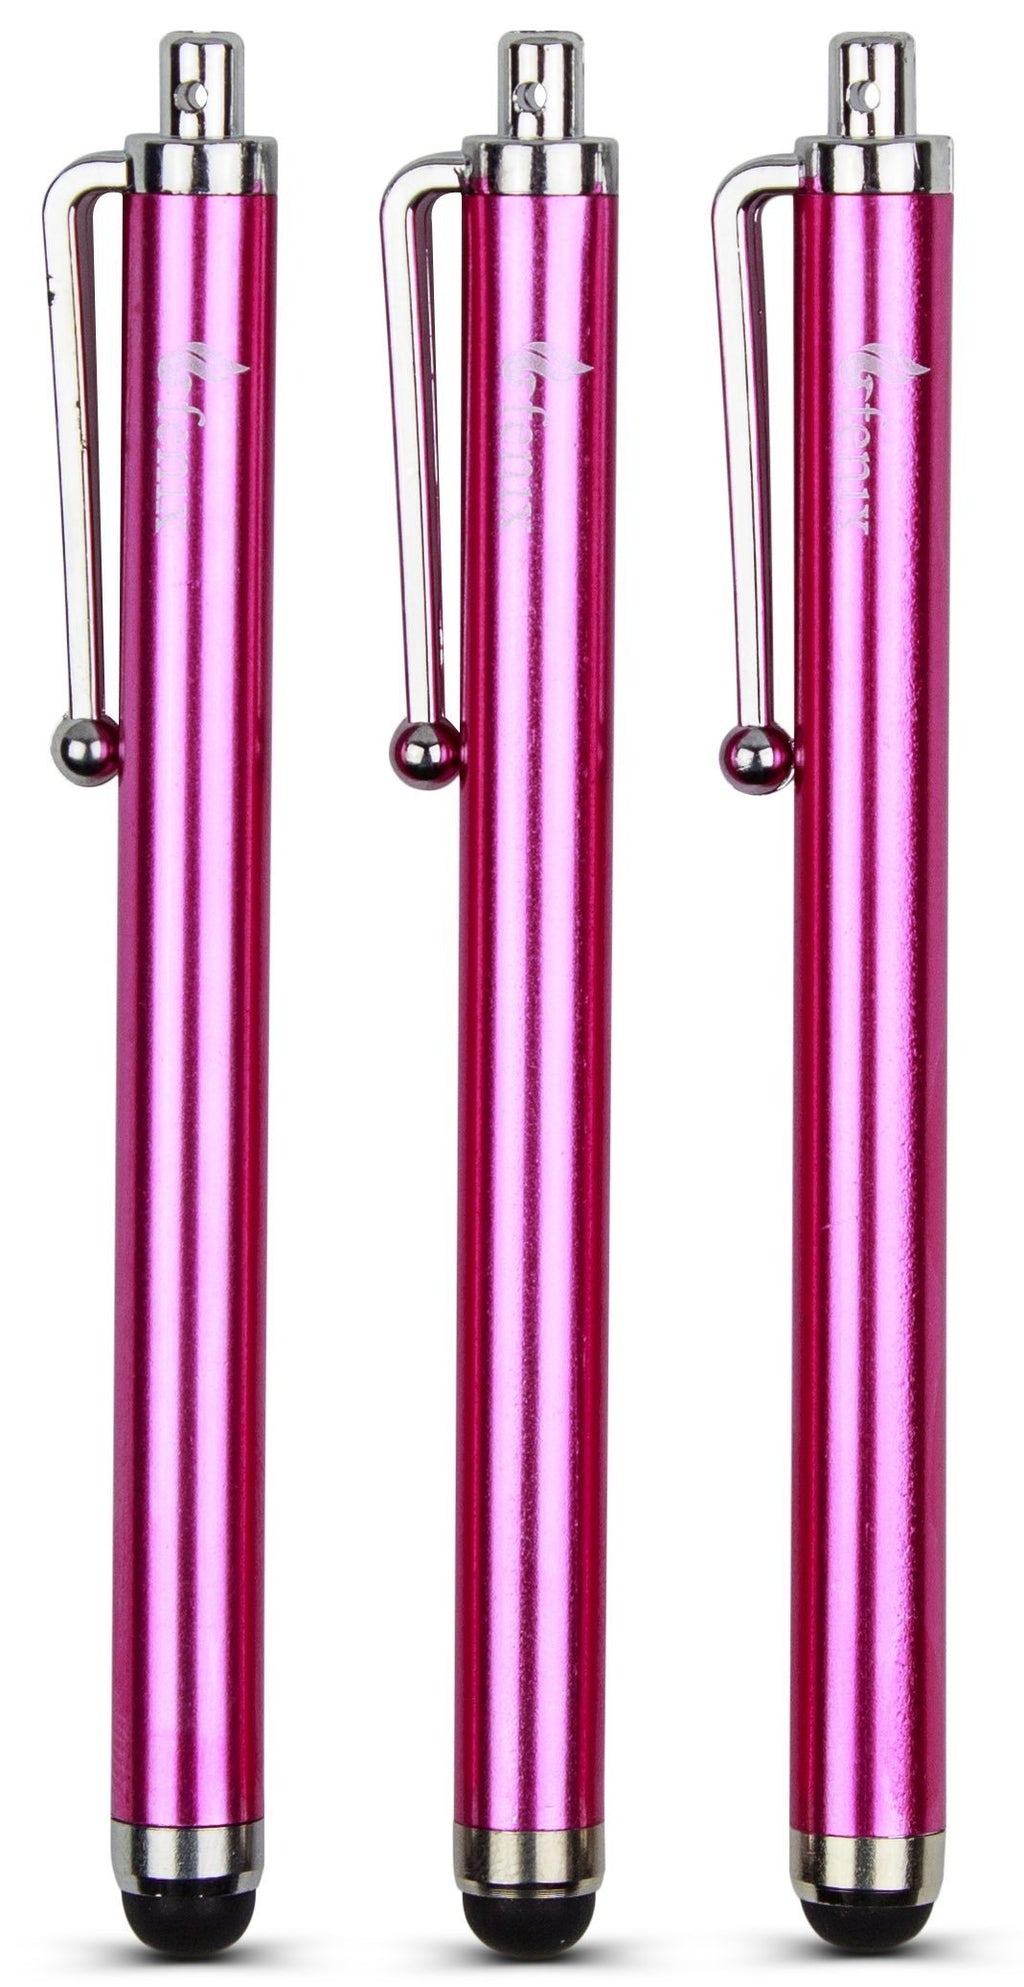 Fenix - Pack of Three Pink Universal Stylus Pen with Soft Rubber Tip for iPhone 4/5/5c/6/6+, iPad/iPad Air/iPad Mini, Samsung Galaxy S4/S5/S6/Edge, Kindle Fire, Surface Pro and Much More